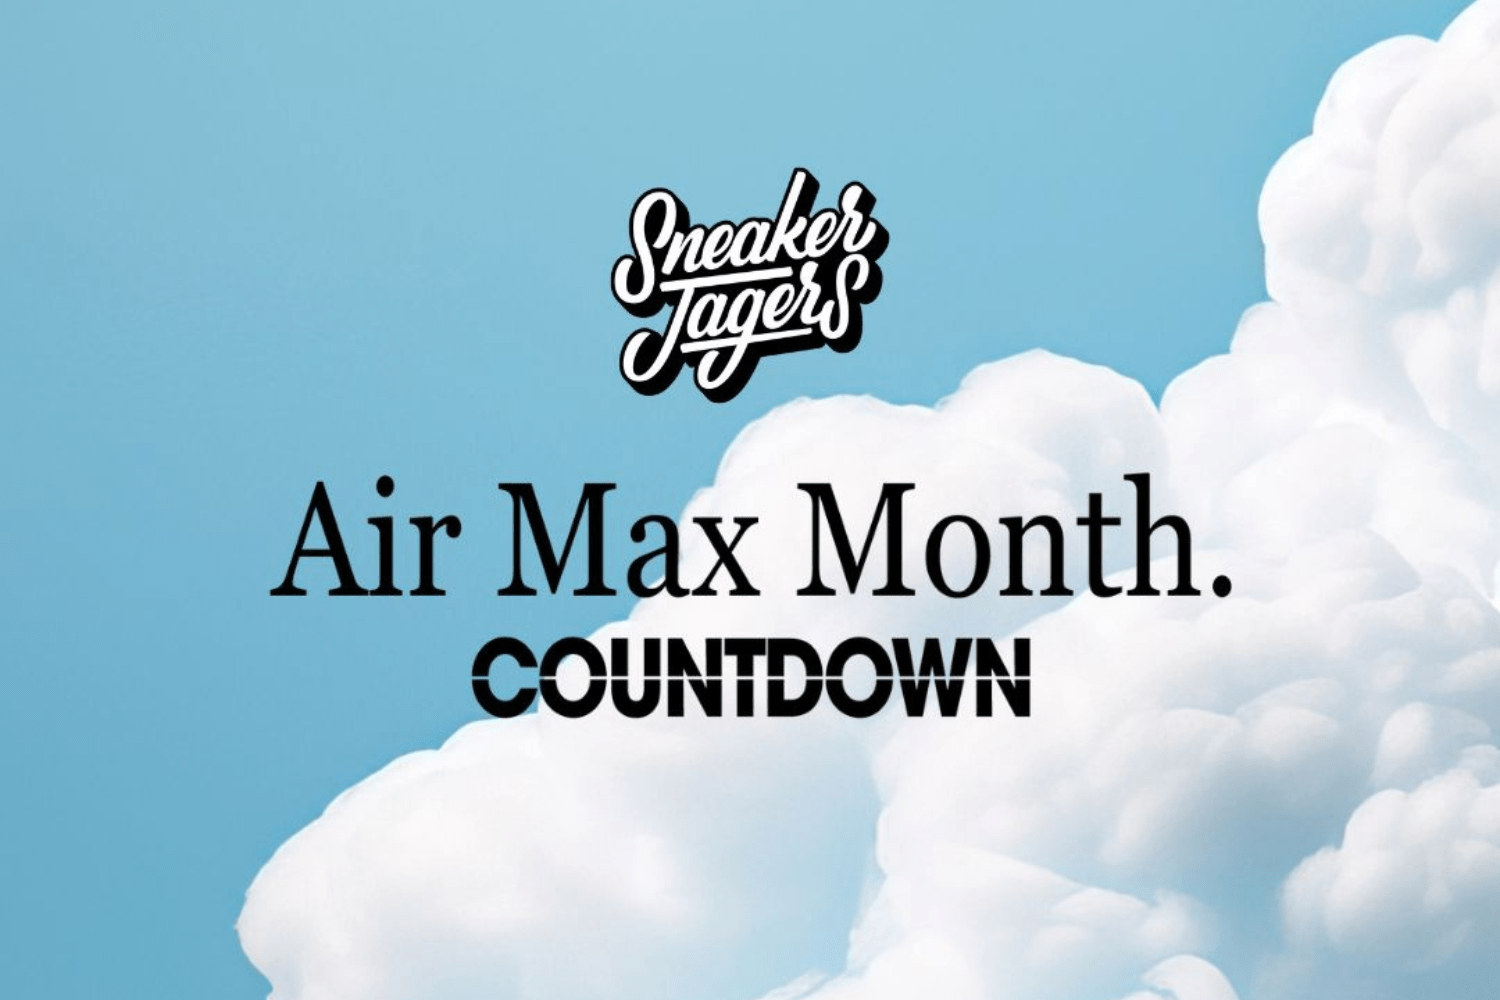 Join Sneakerjagers' Countdown to Air Max Month 2024